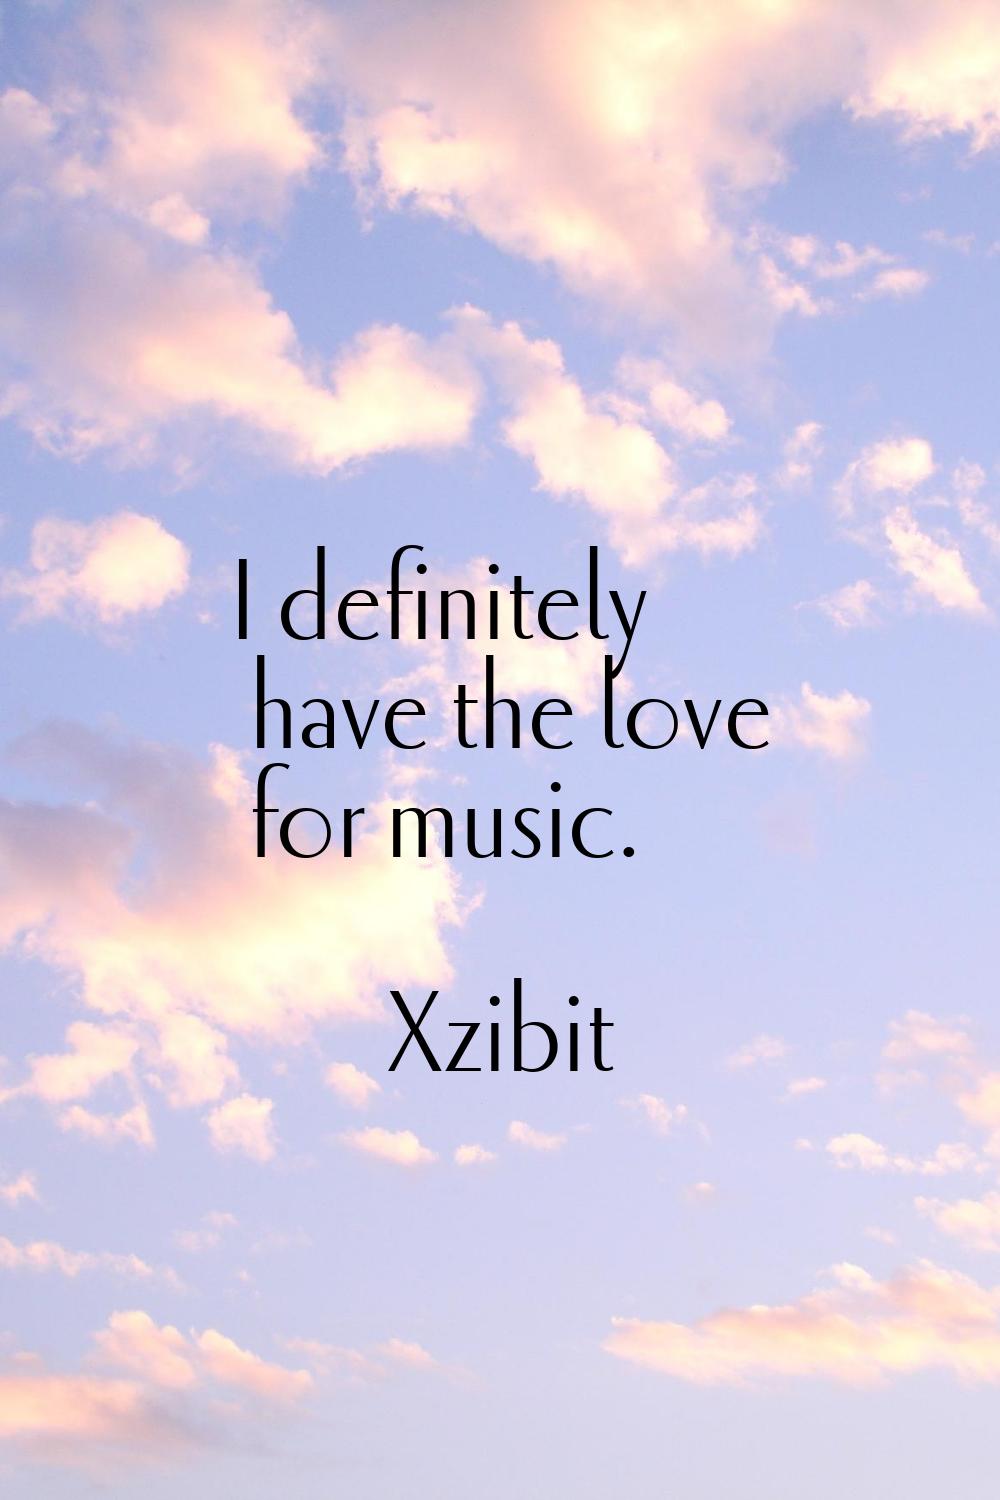 I definitely have the love for music.